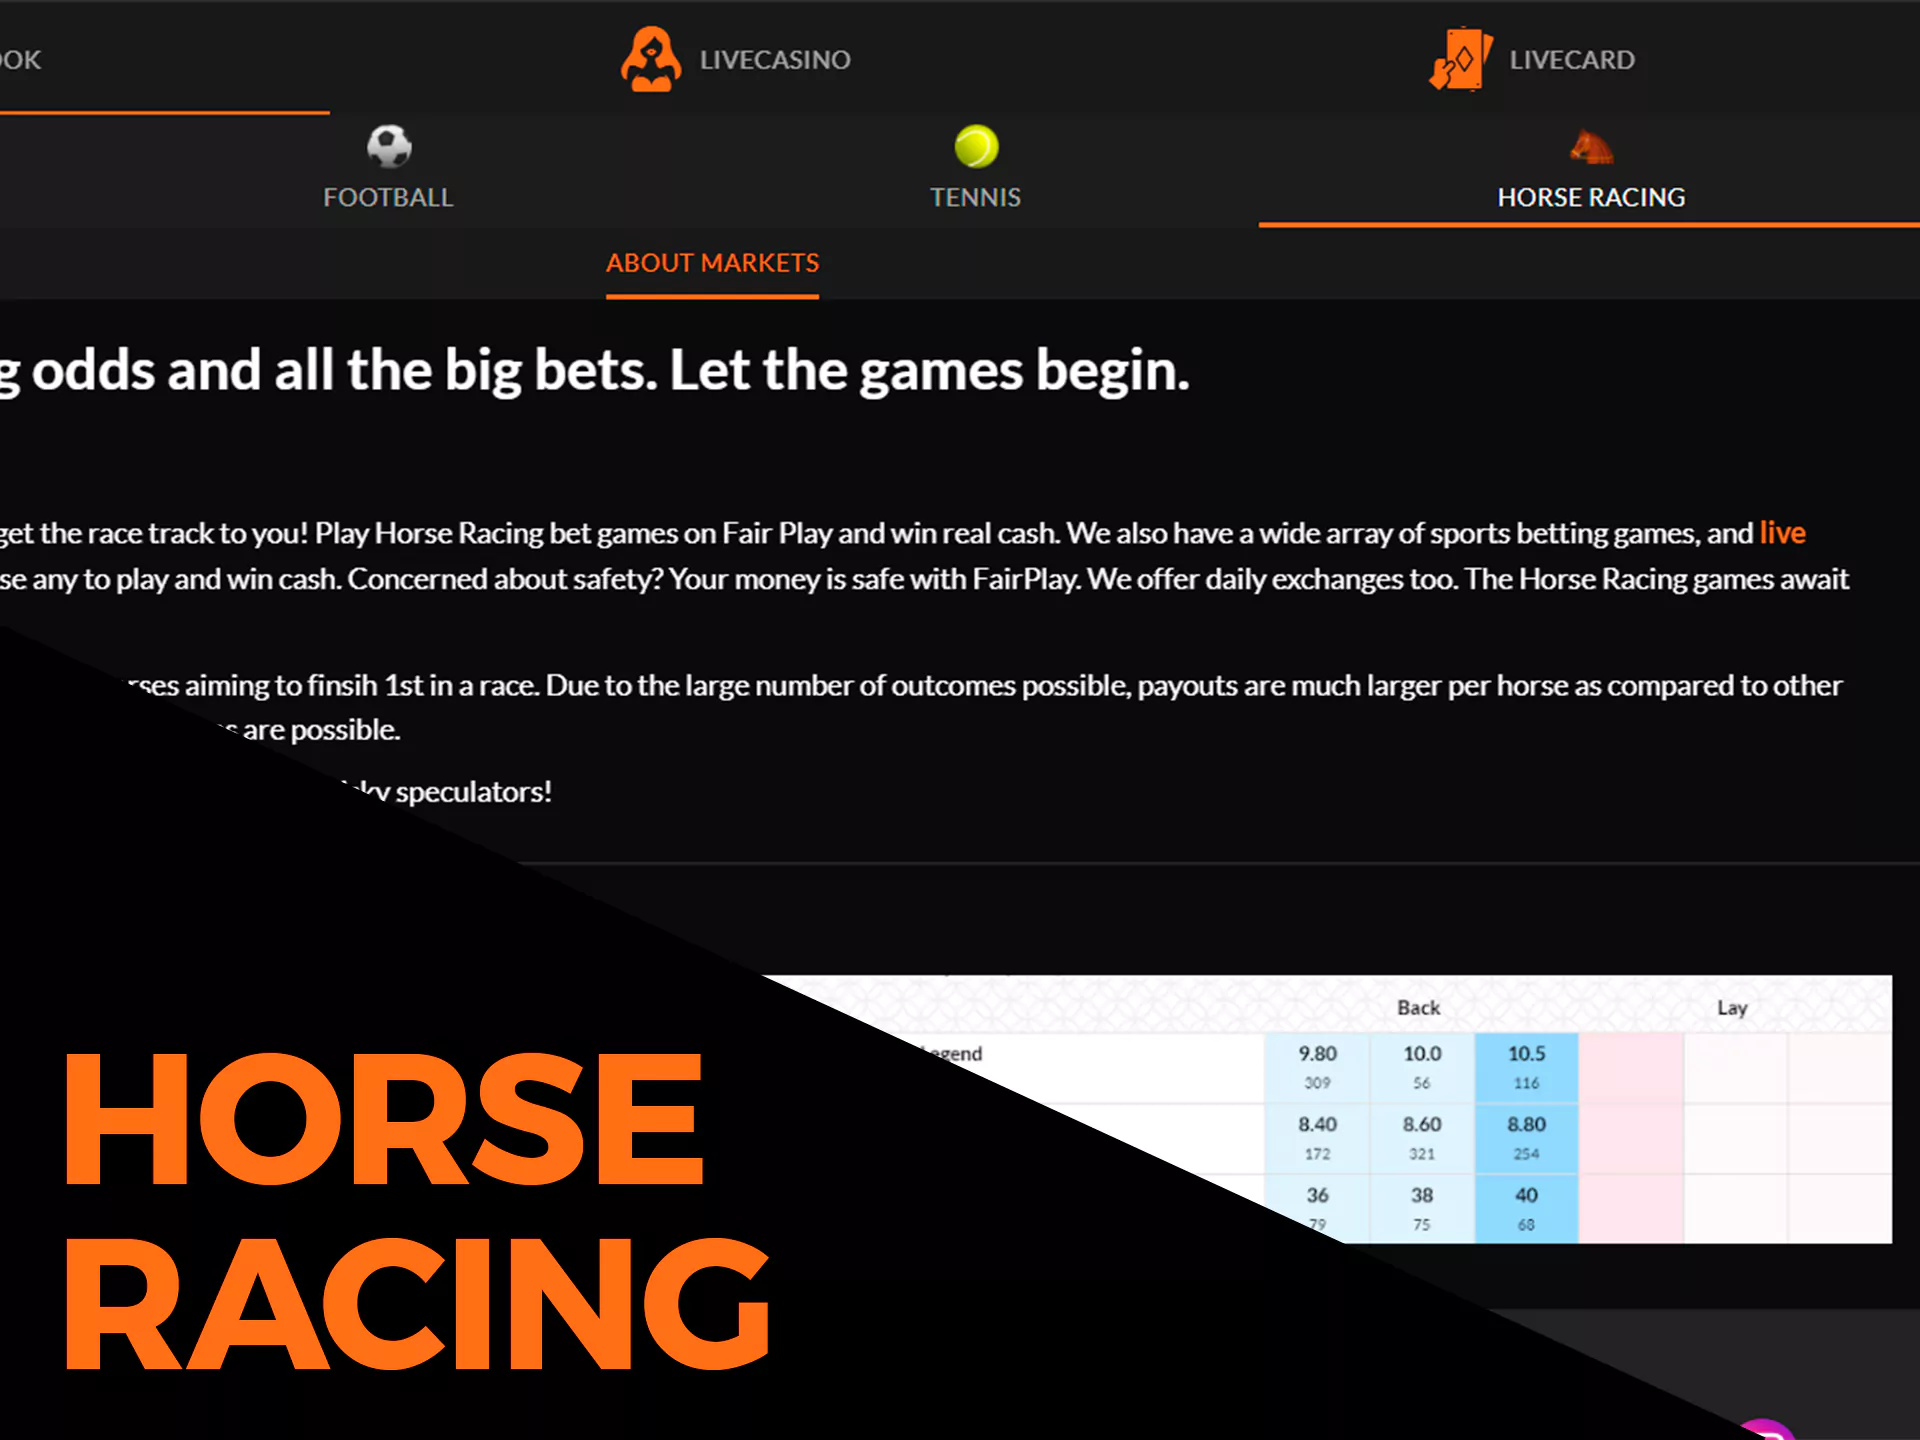 Horse racing betting is also available in Fairplay.